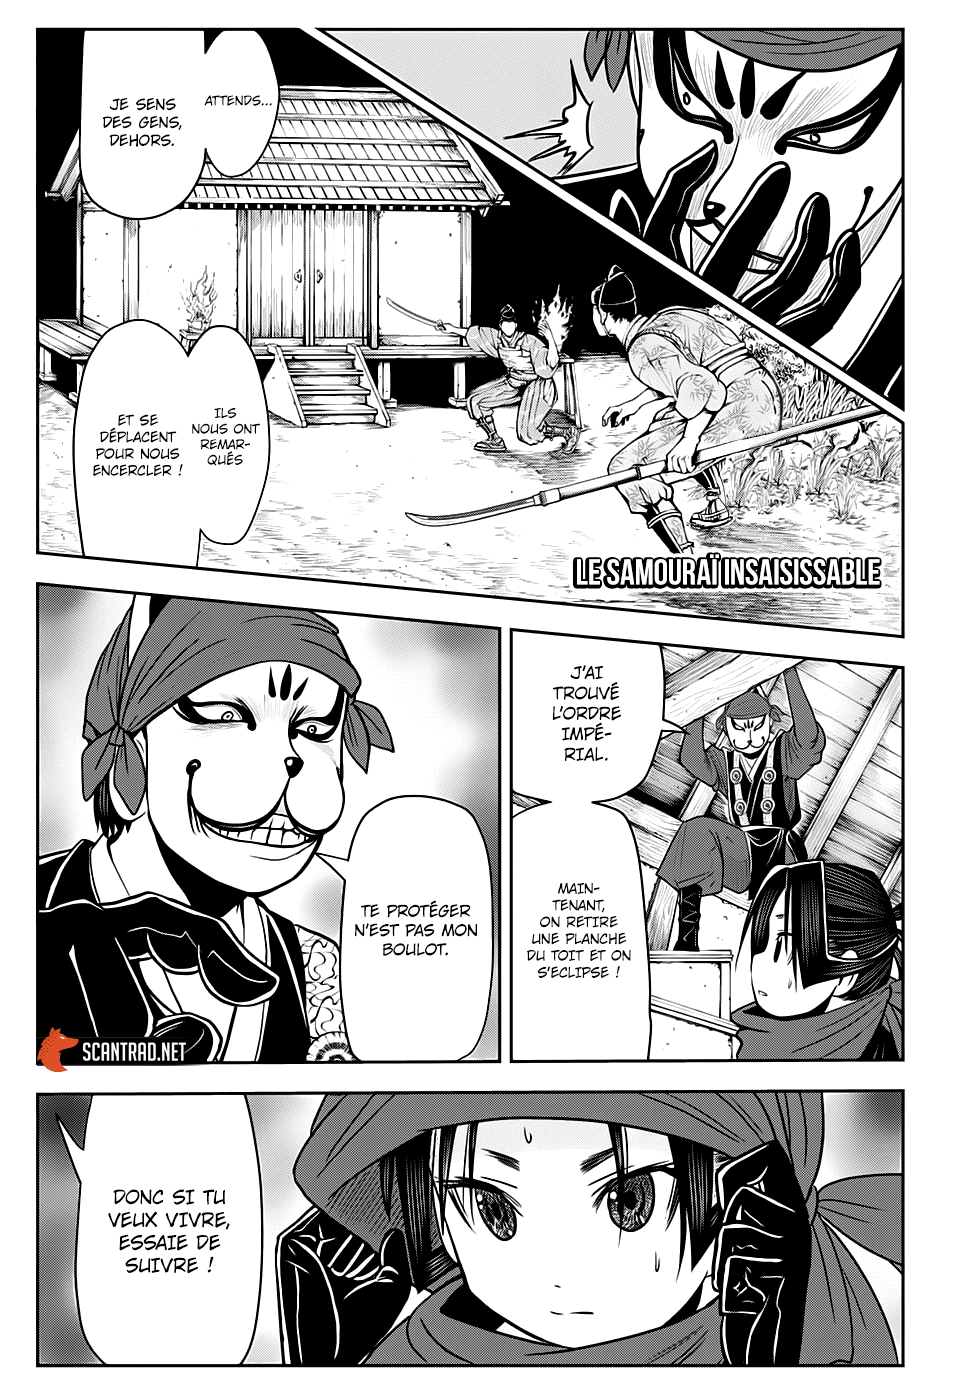 Le Samouraï Insaisissable: Chapter 13 - Page 1